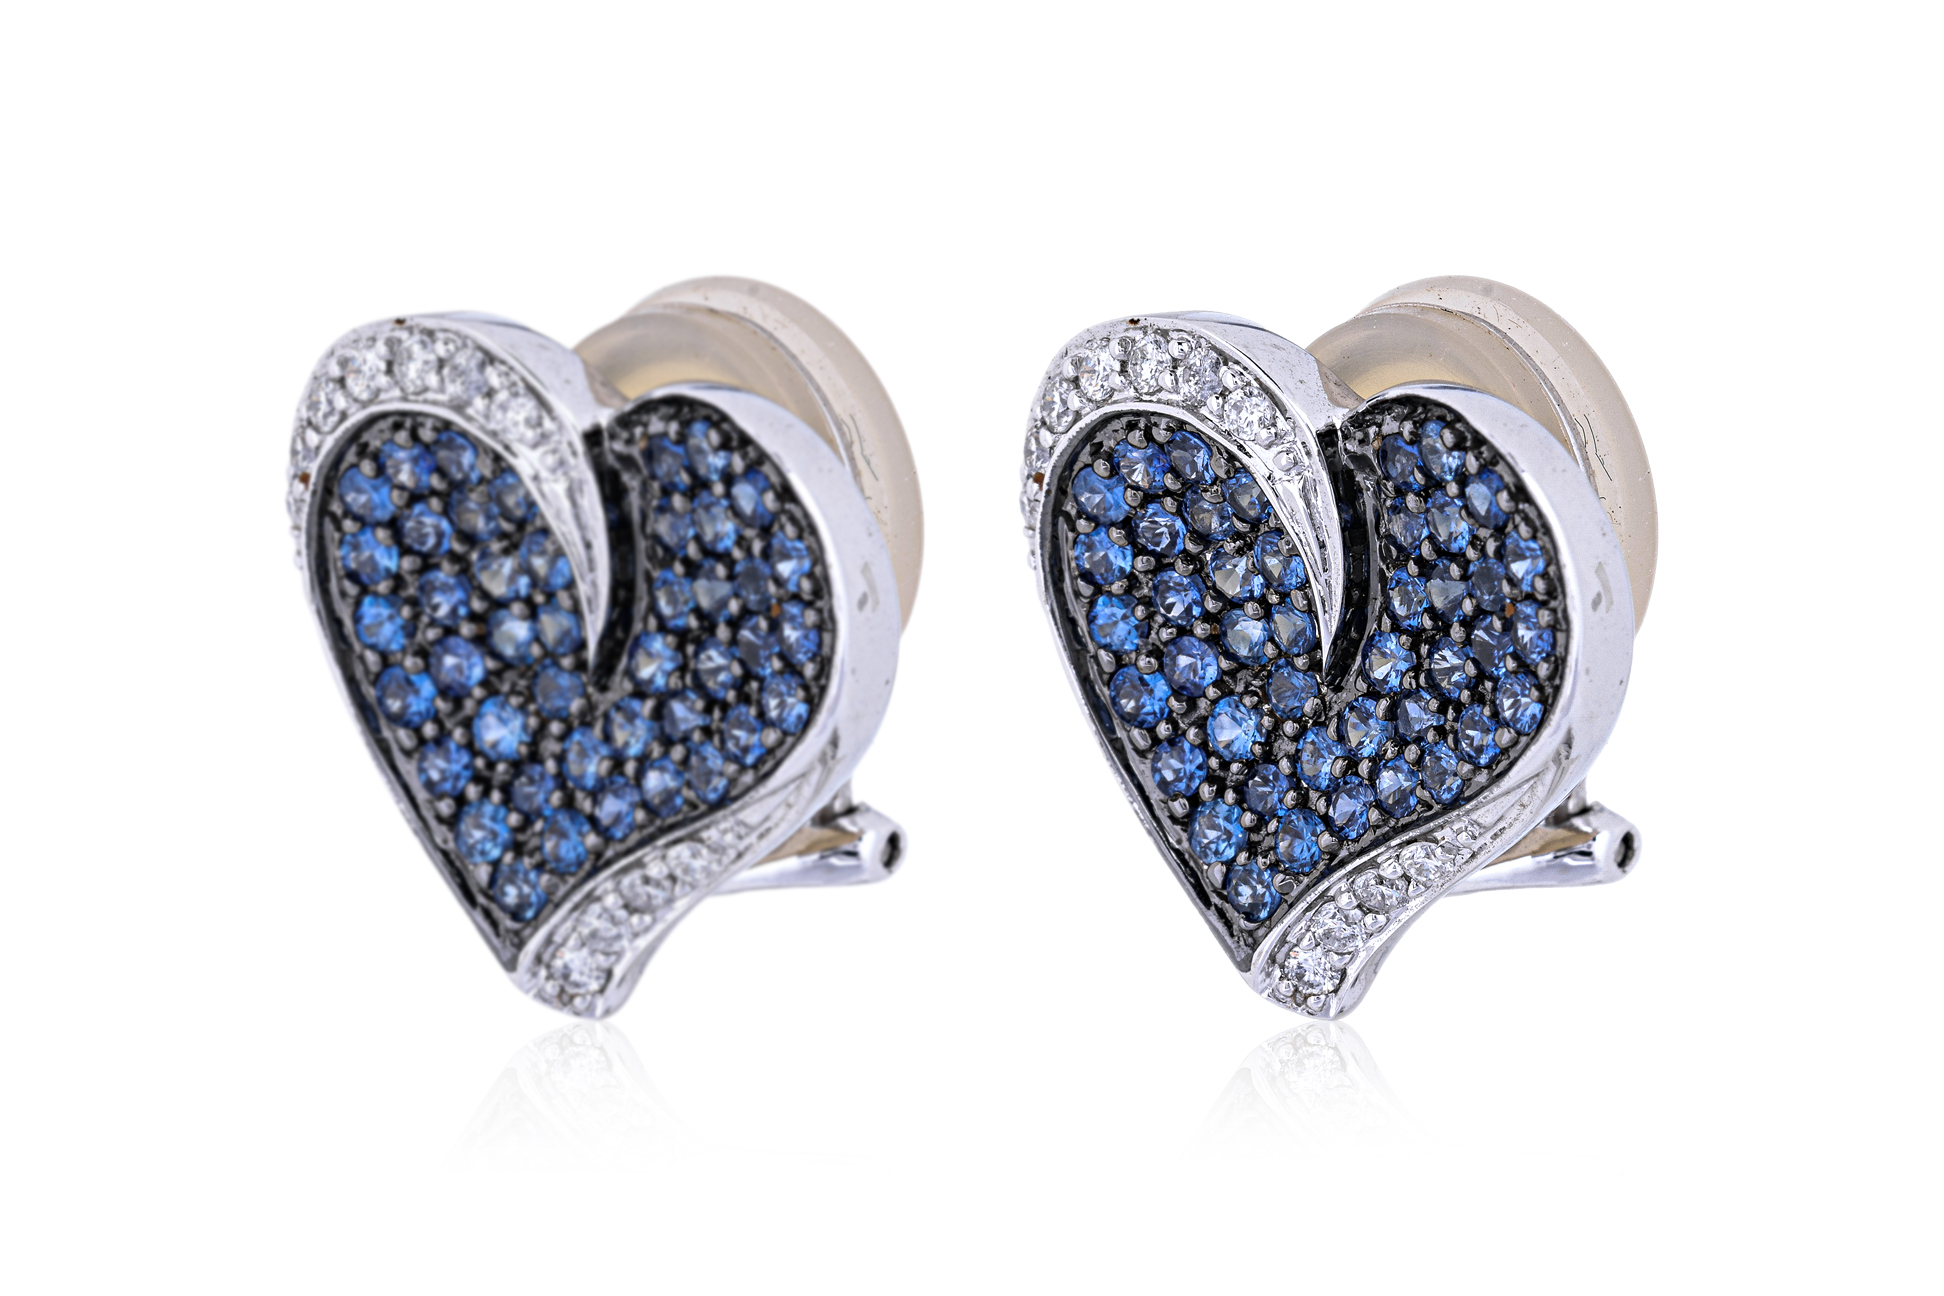 A PAIR OF SAPPHIRE AND DIAMOND 'HEART' EARRINGS - Image 2 of 4